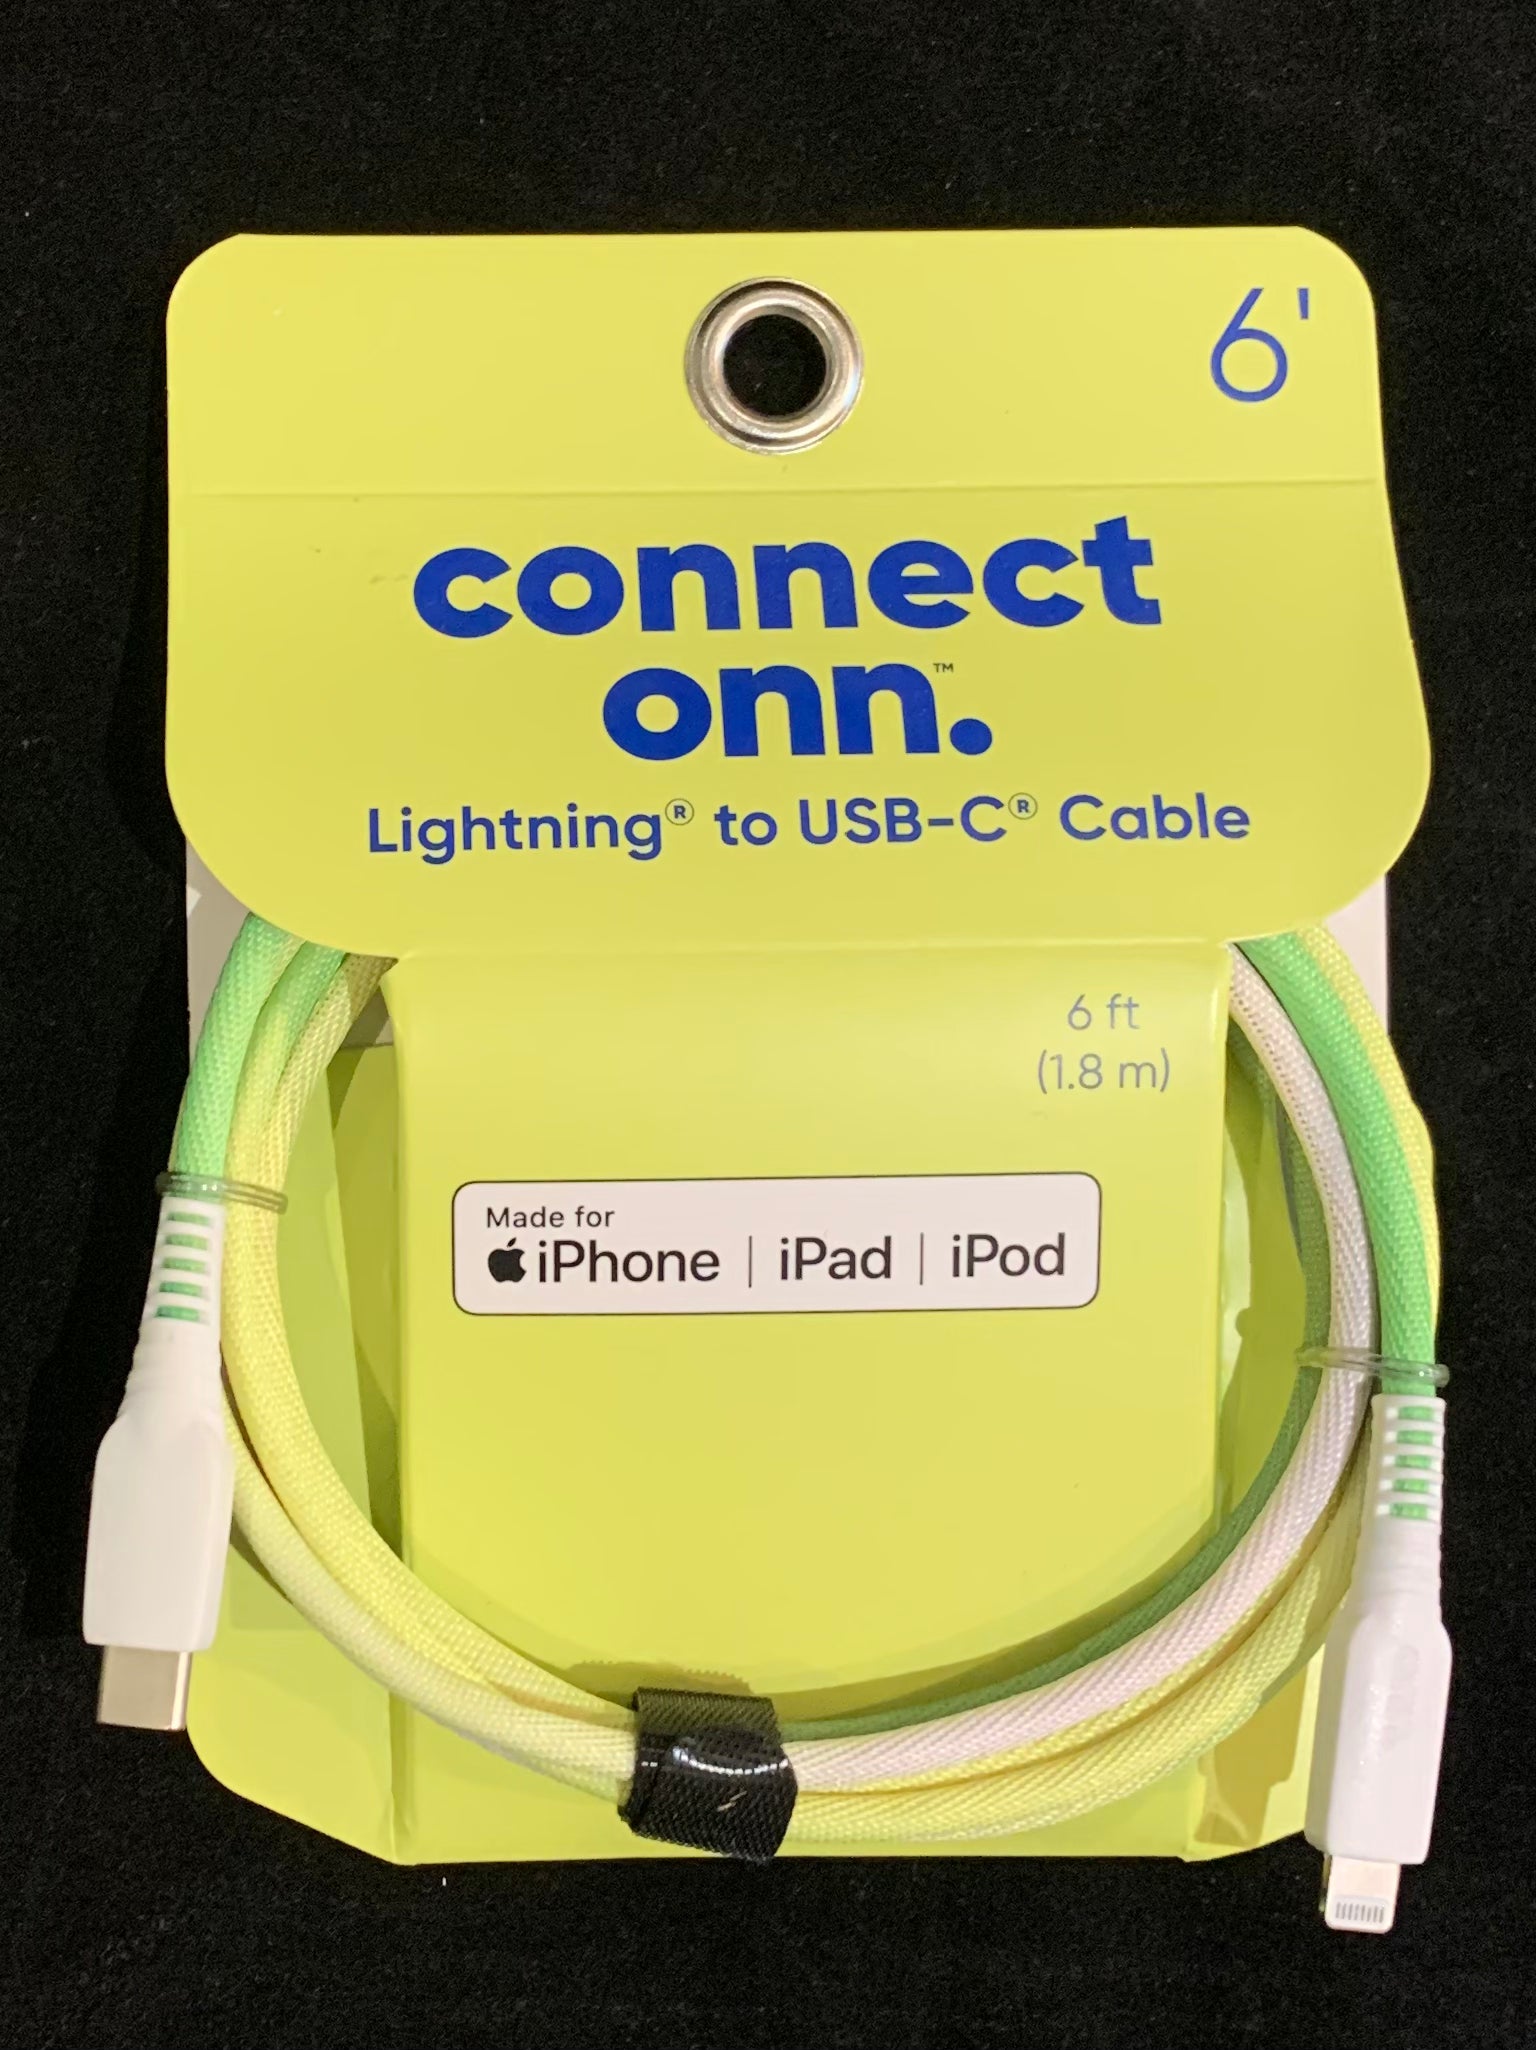 Connect Onn Lightning to USB-C Cable 6ft (1.8m) for iPhone/iPad/iPod